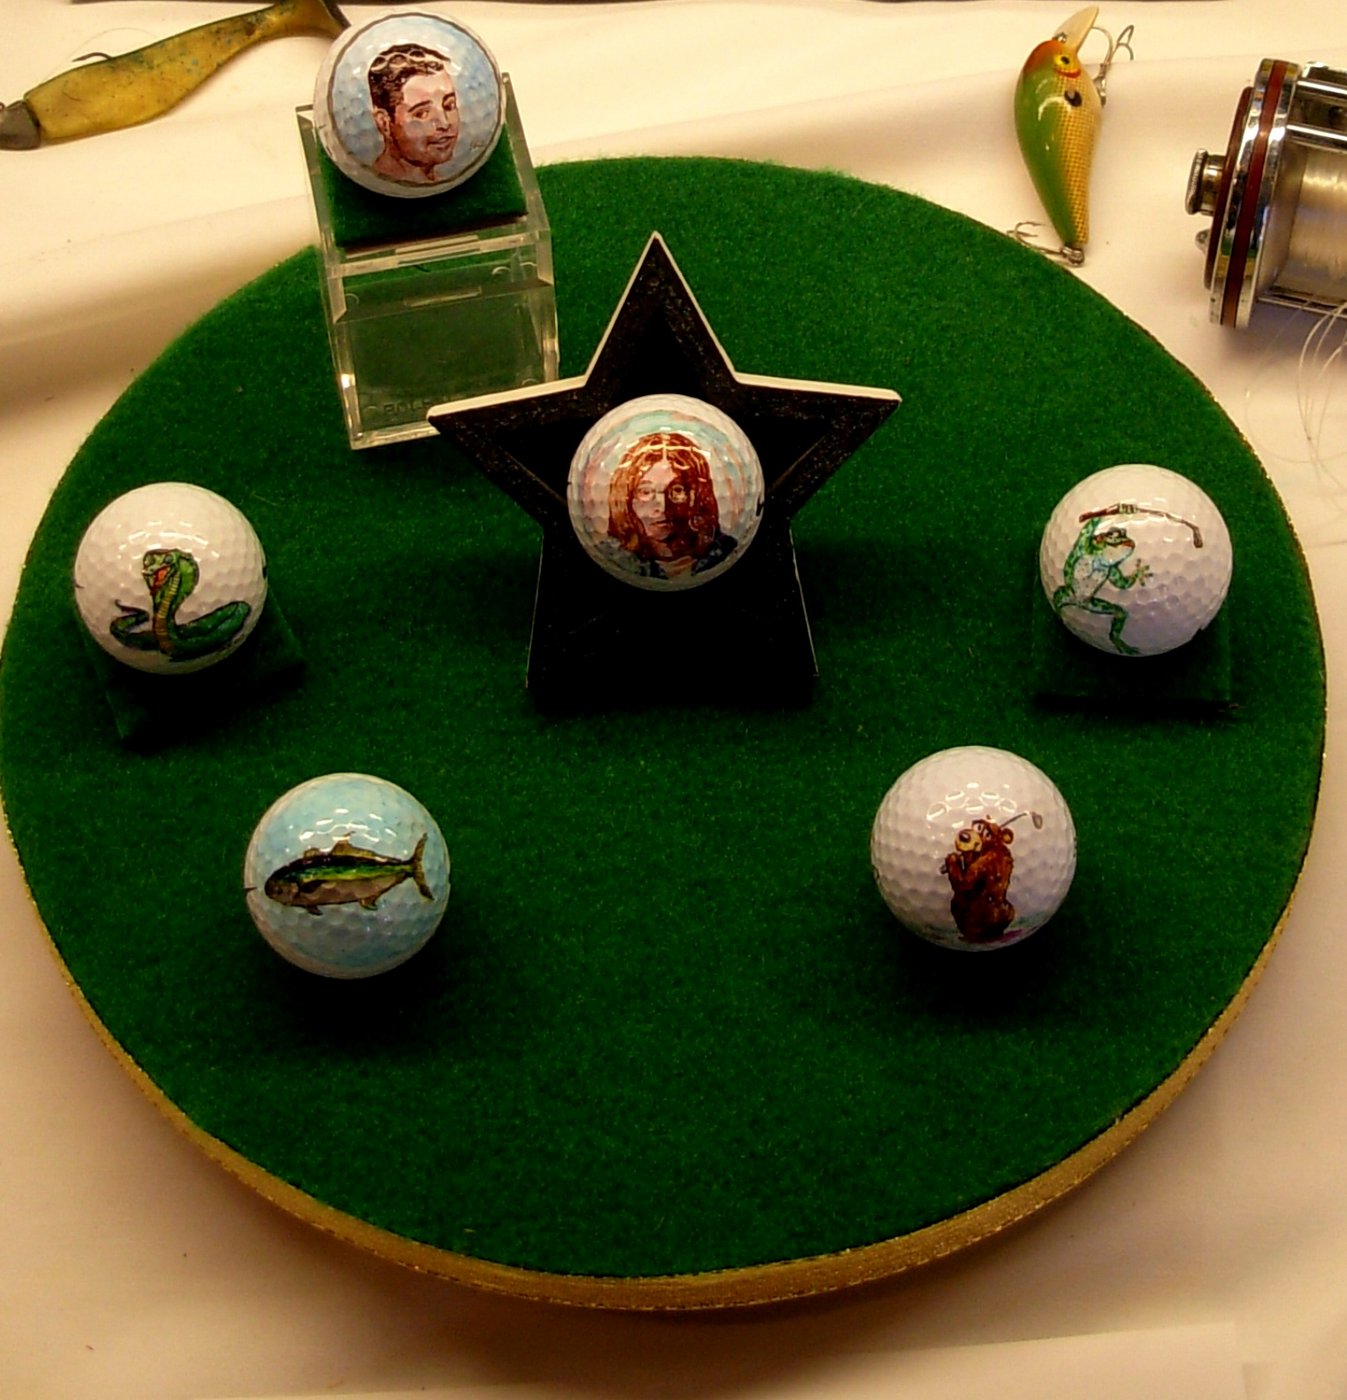 Golf ball display for Fathers Day